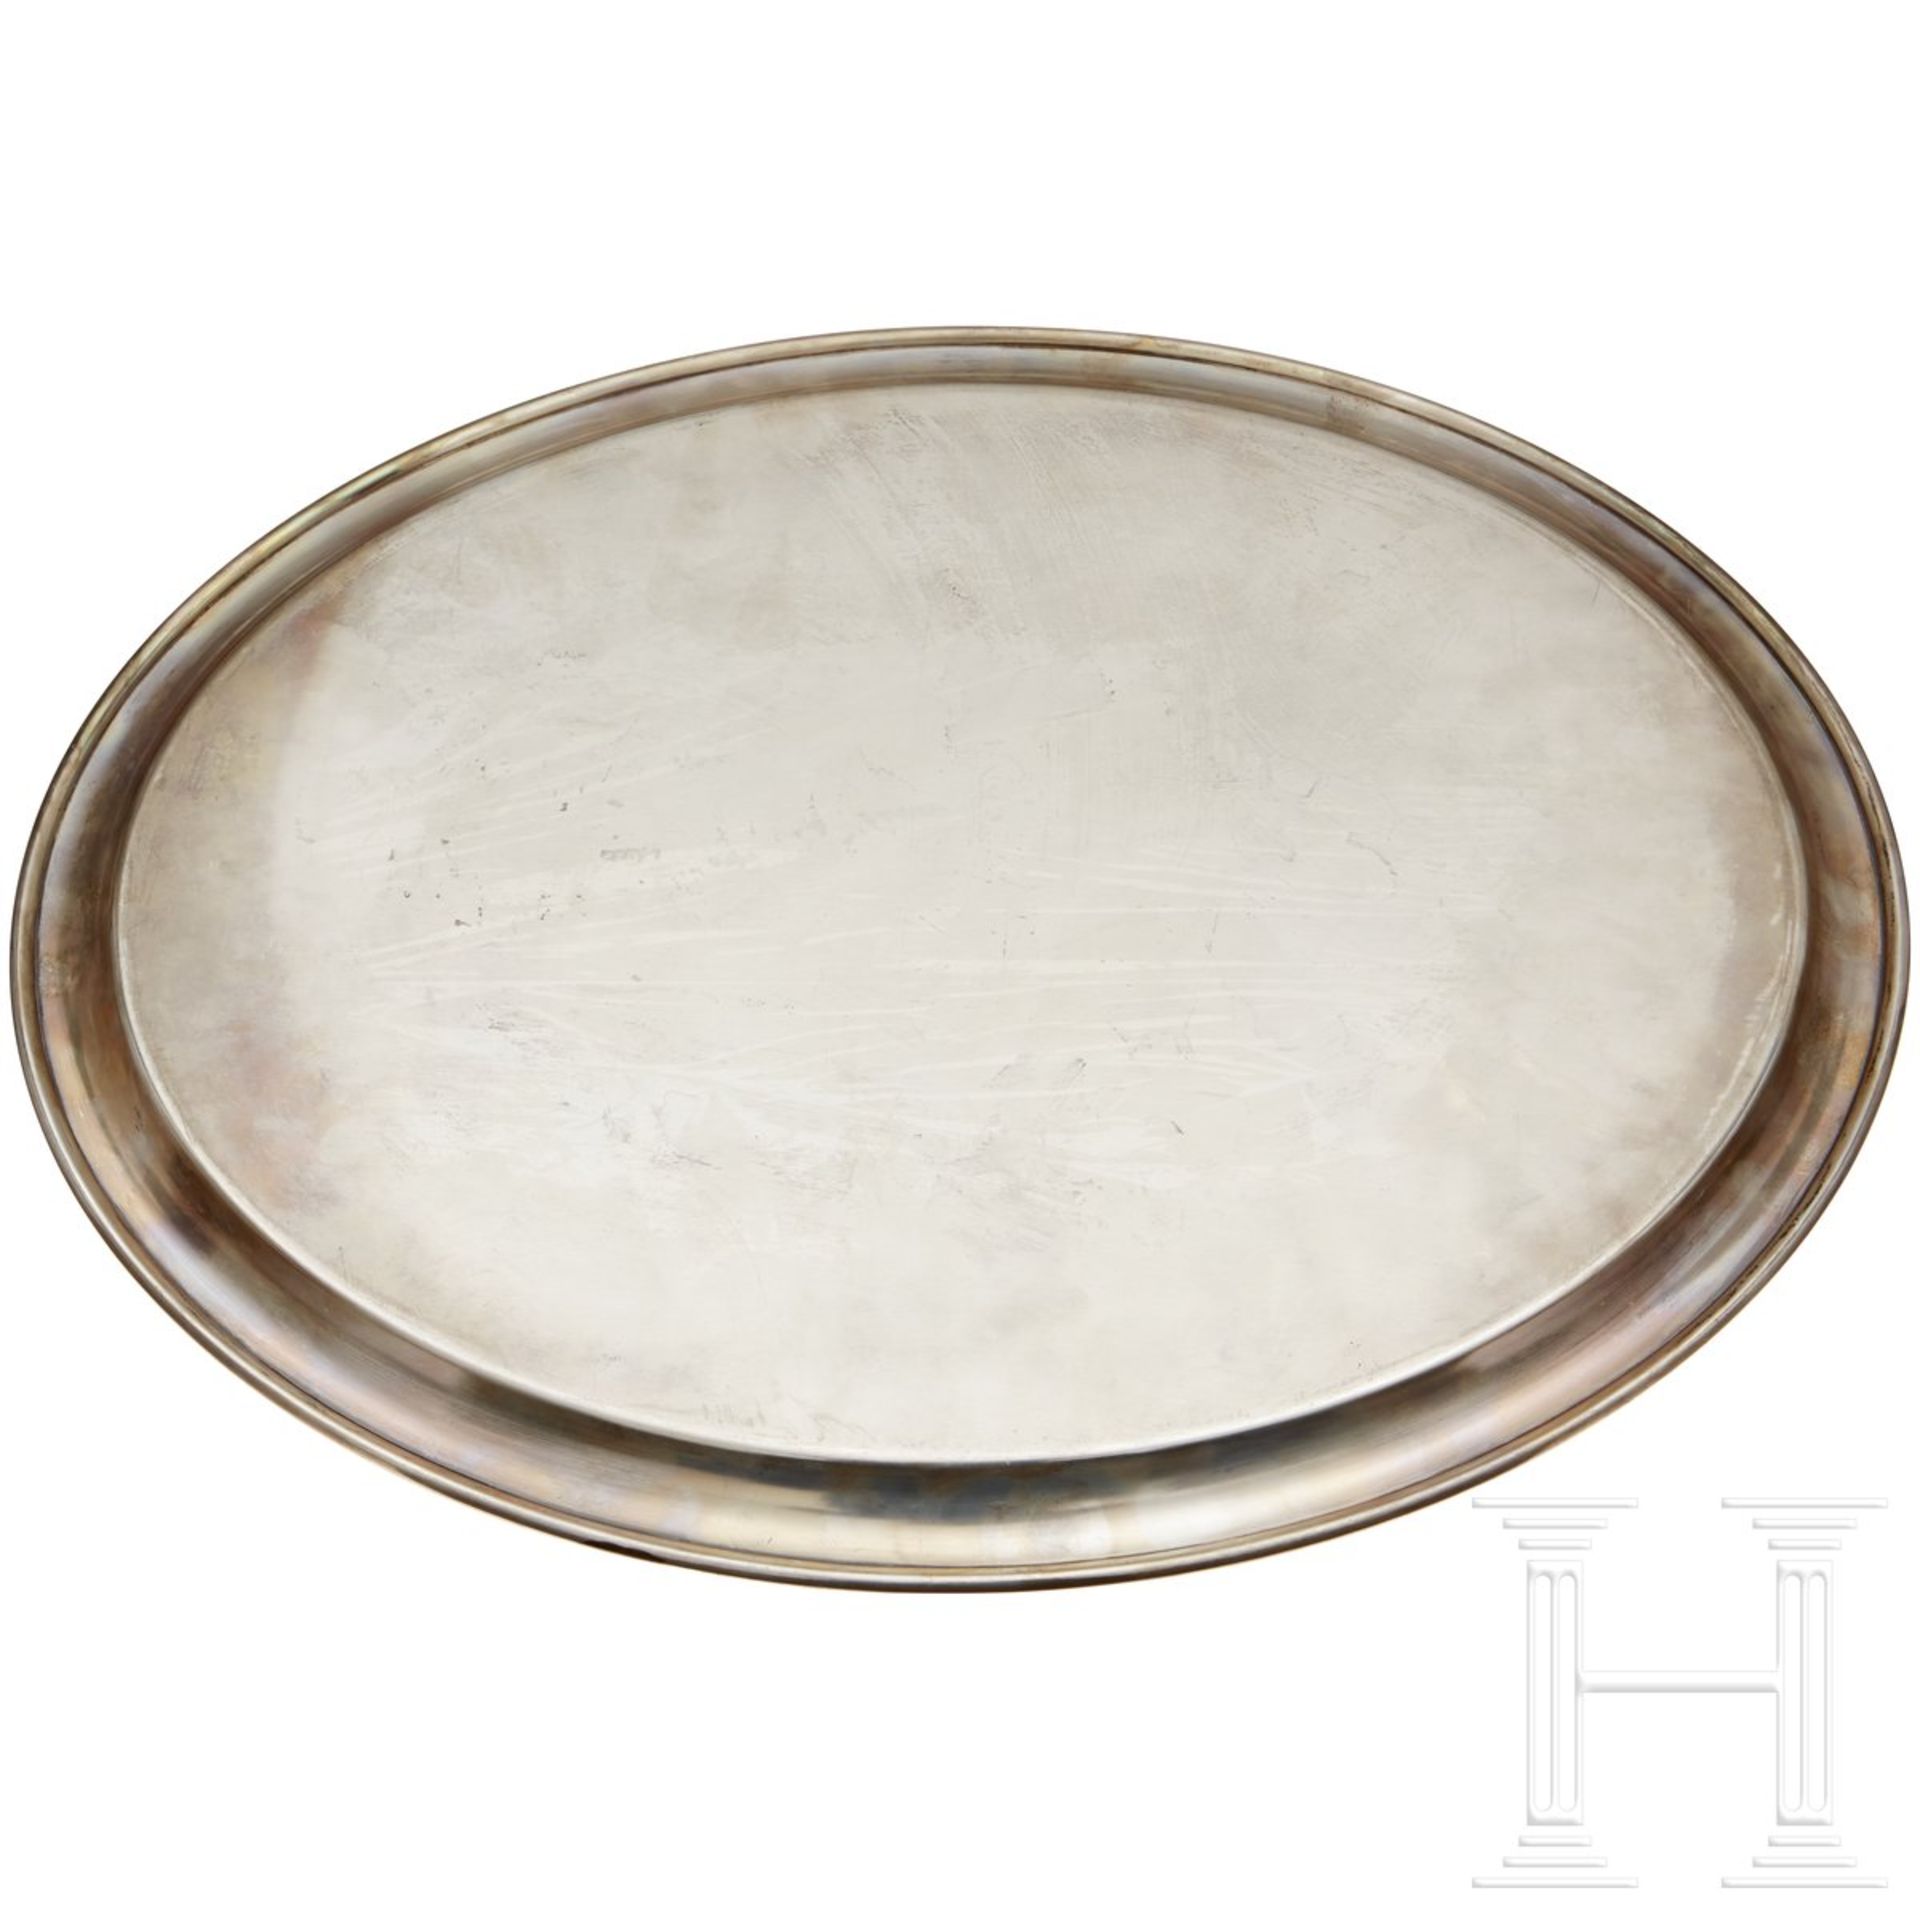 An oval Serving Platter from a Silver ServiceUnmarked platter, stamped "Wellner", "60" on top - Image 2 of 3